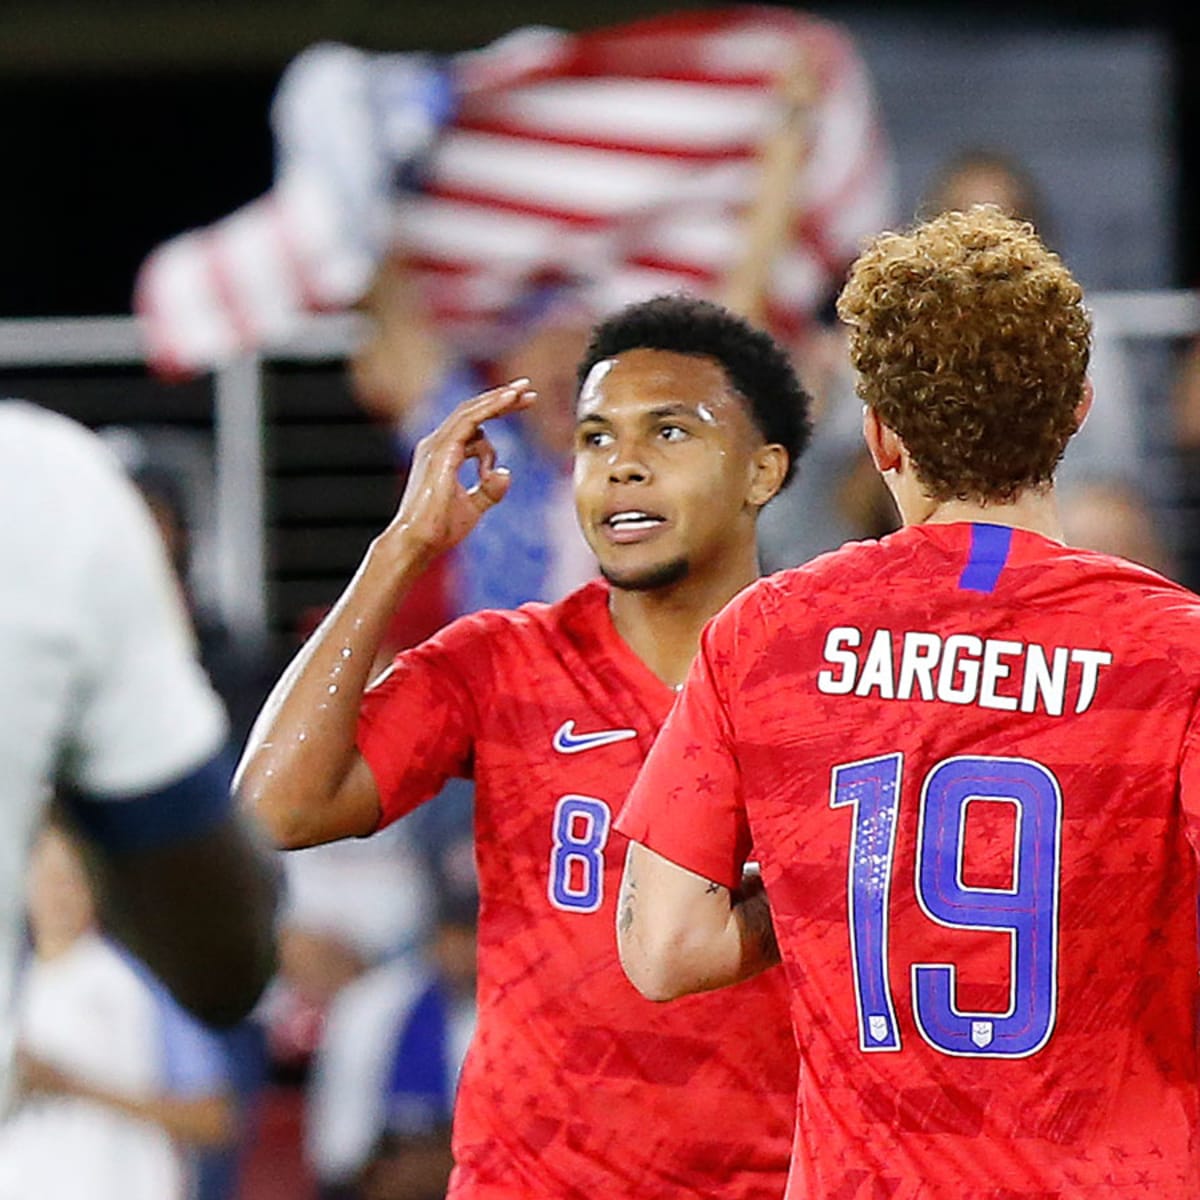 USA v. Cuba CONCACAF Nations League: What we Learned - Stars and